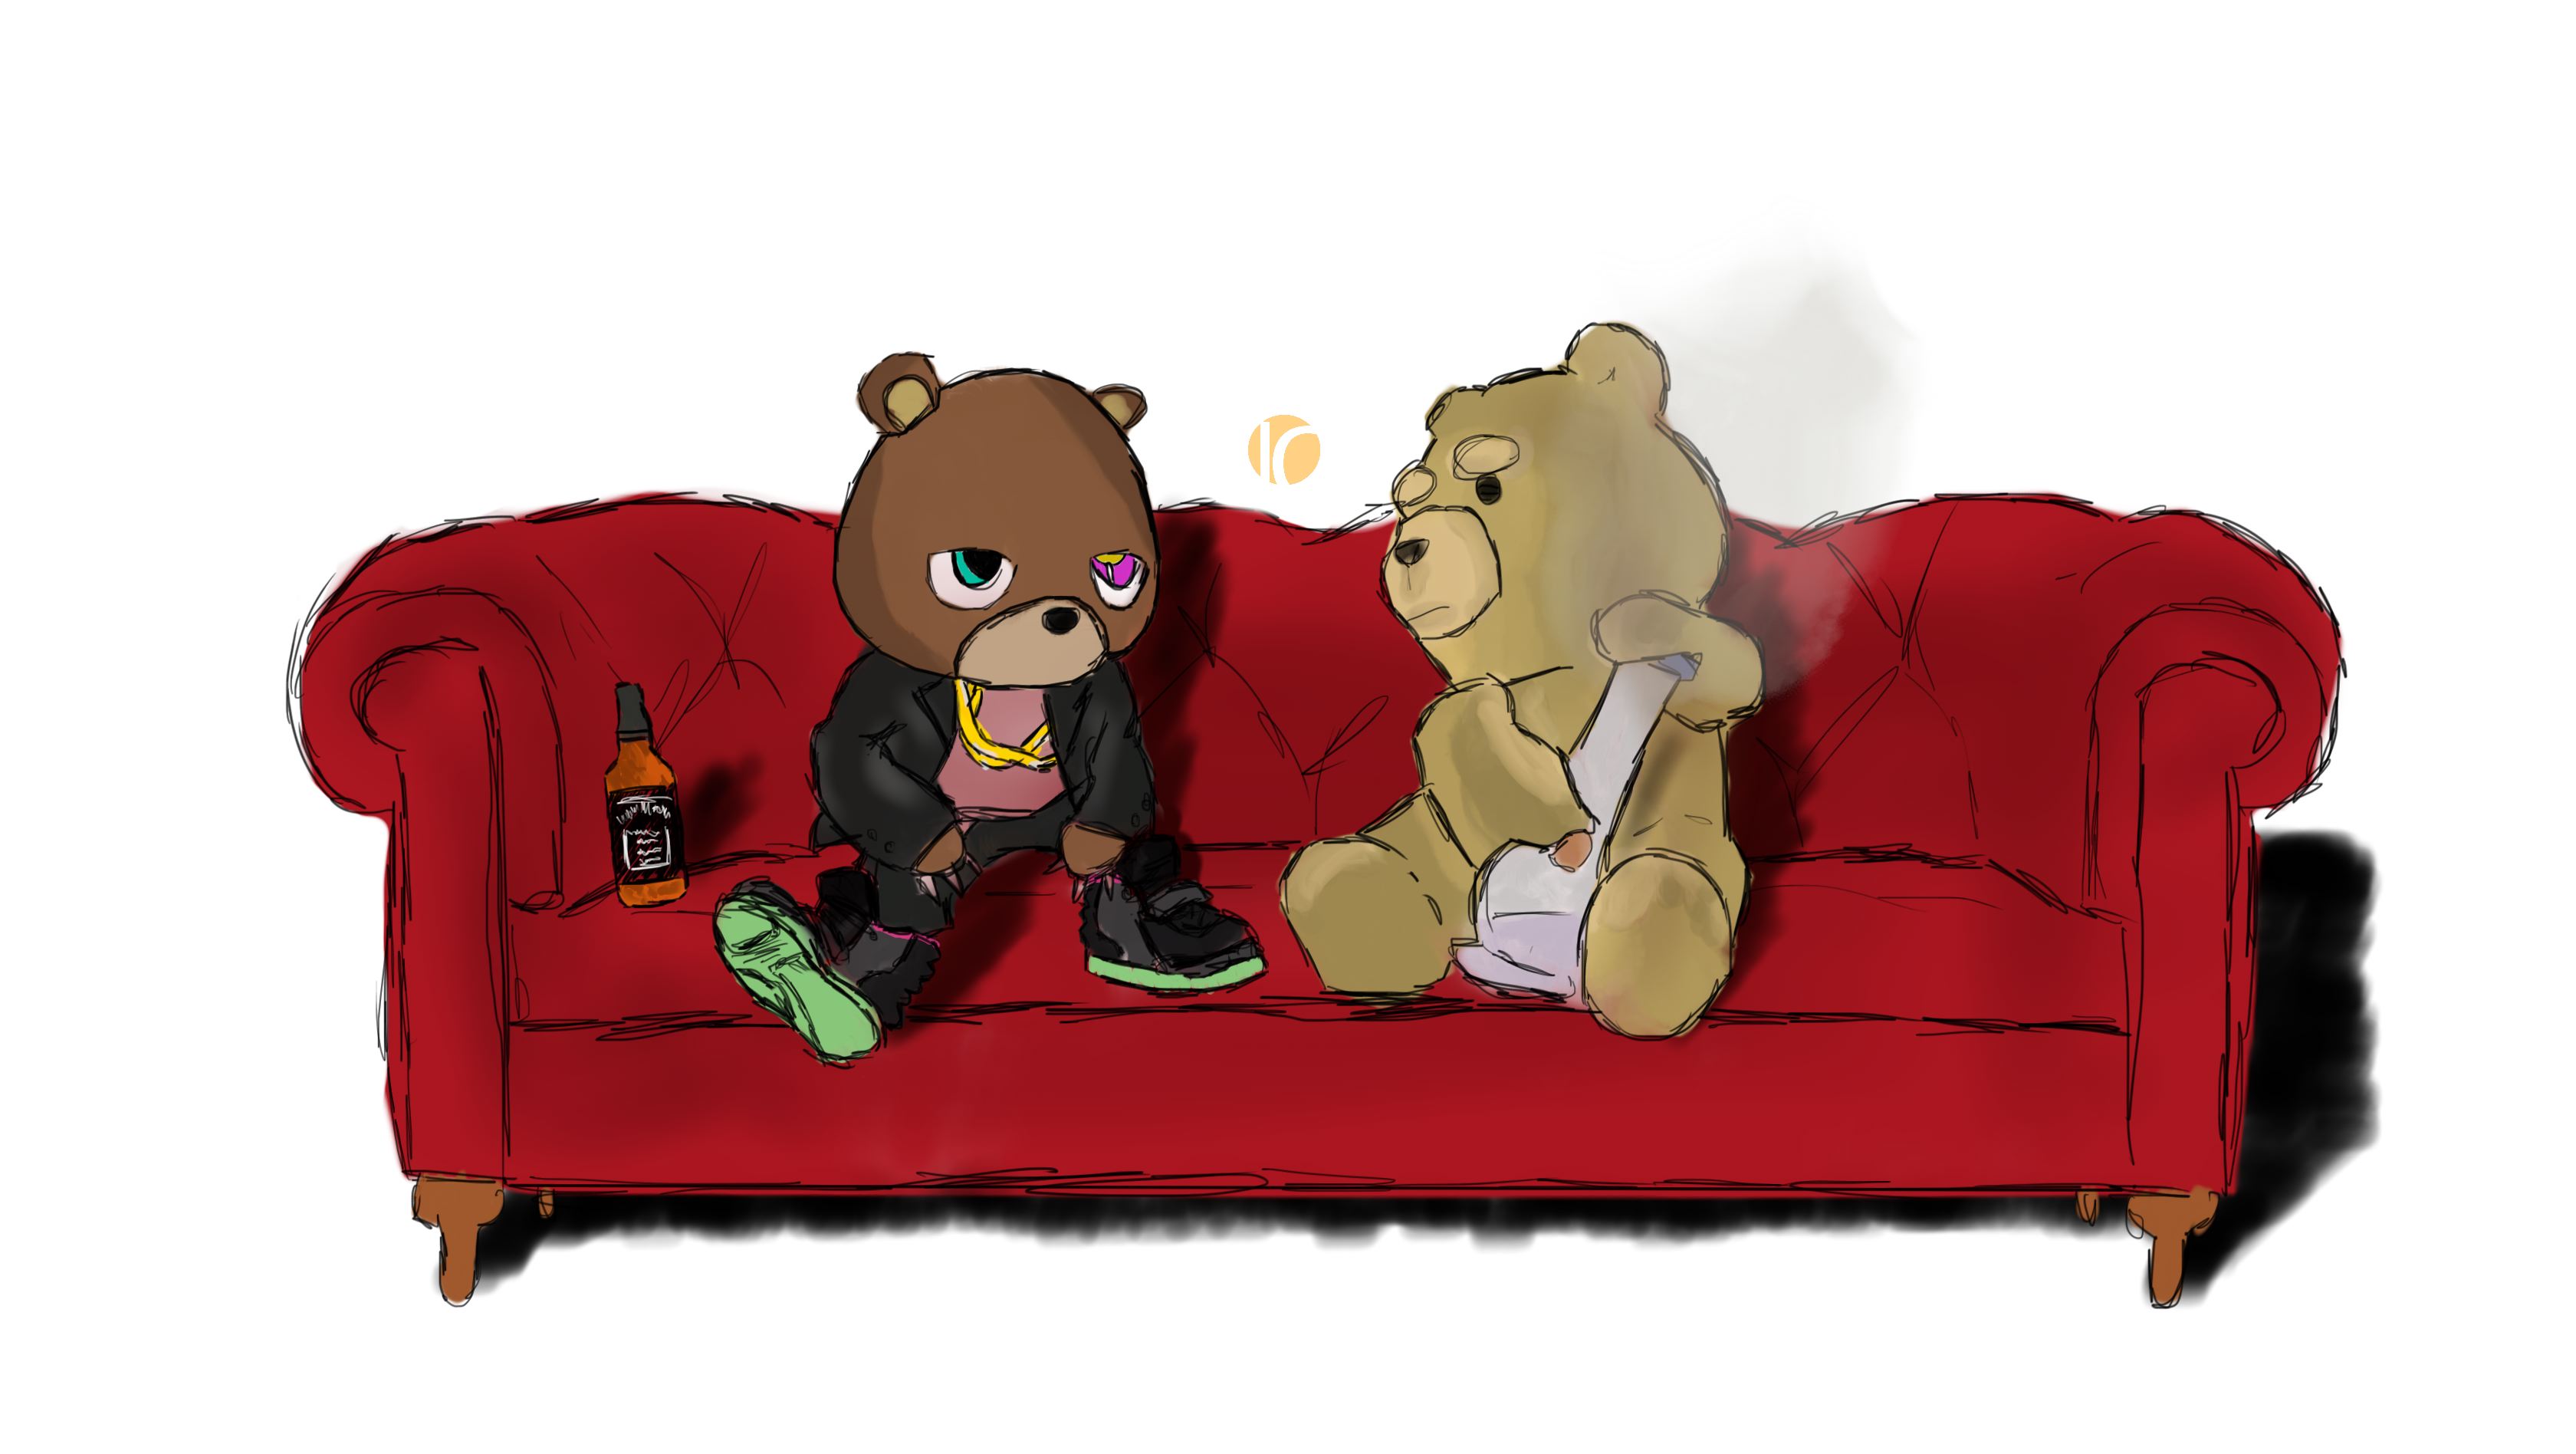 Kanye West Bear Wallpaper - Dropout Bear And Ted - HD Wallpaper 